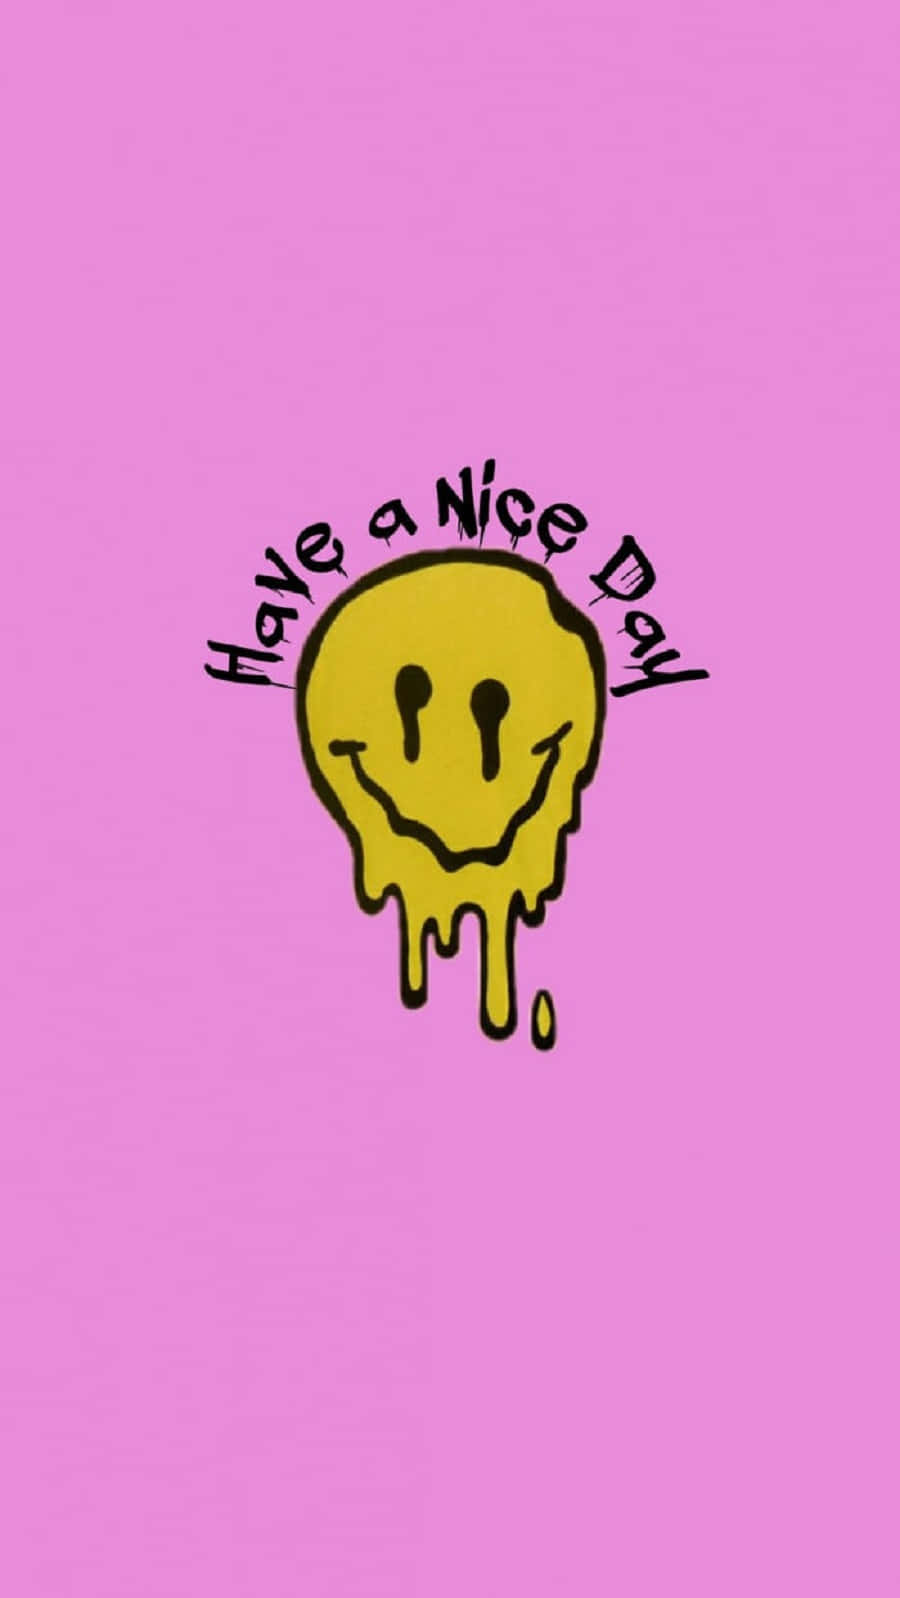 This Preppy Melted Smile Sticker Is High Quality And Cheap.